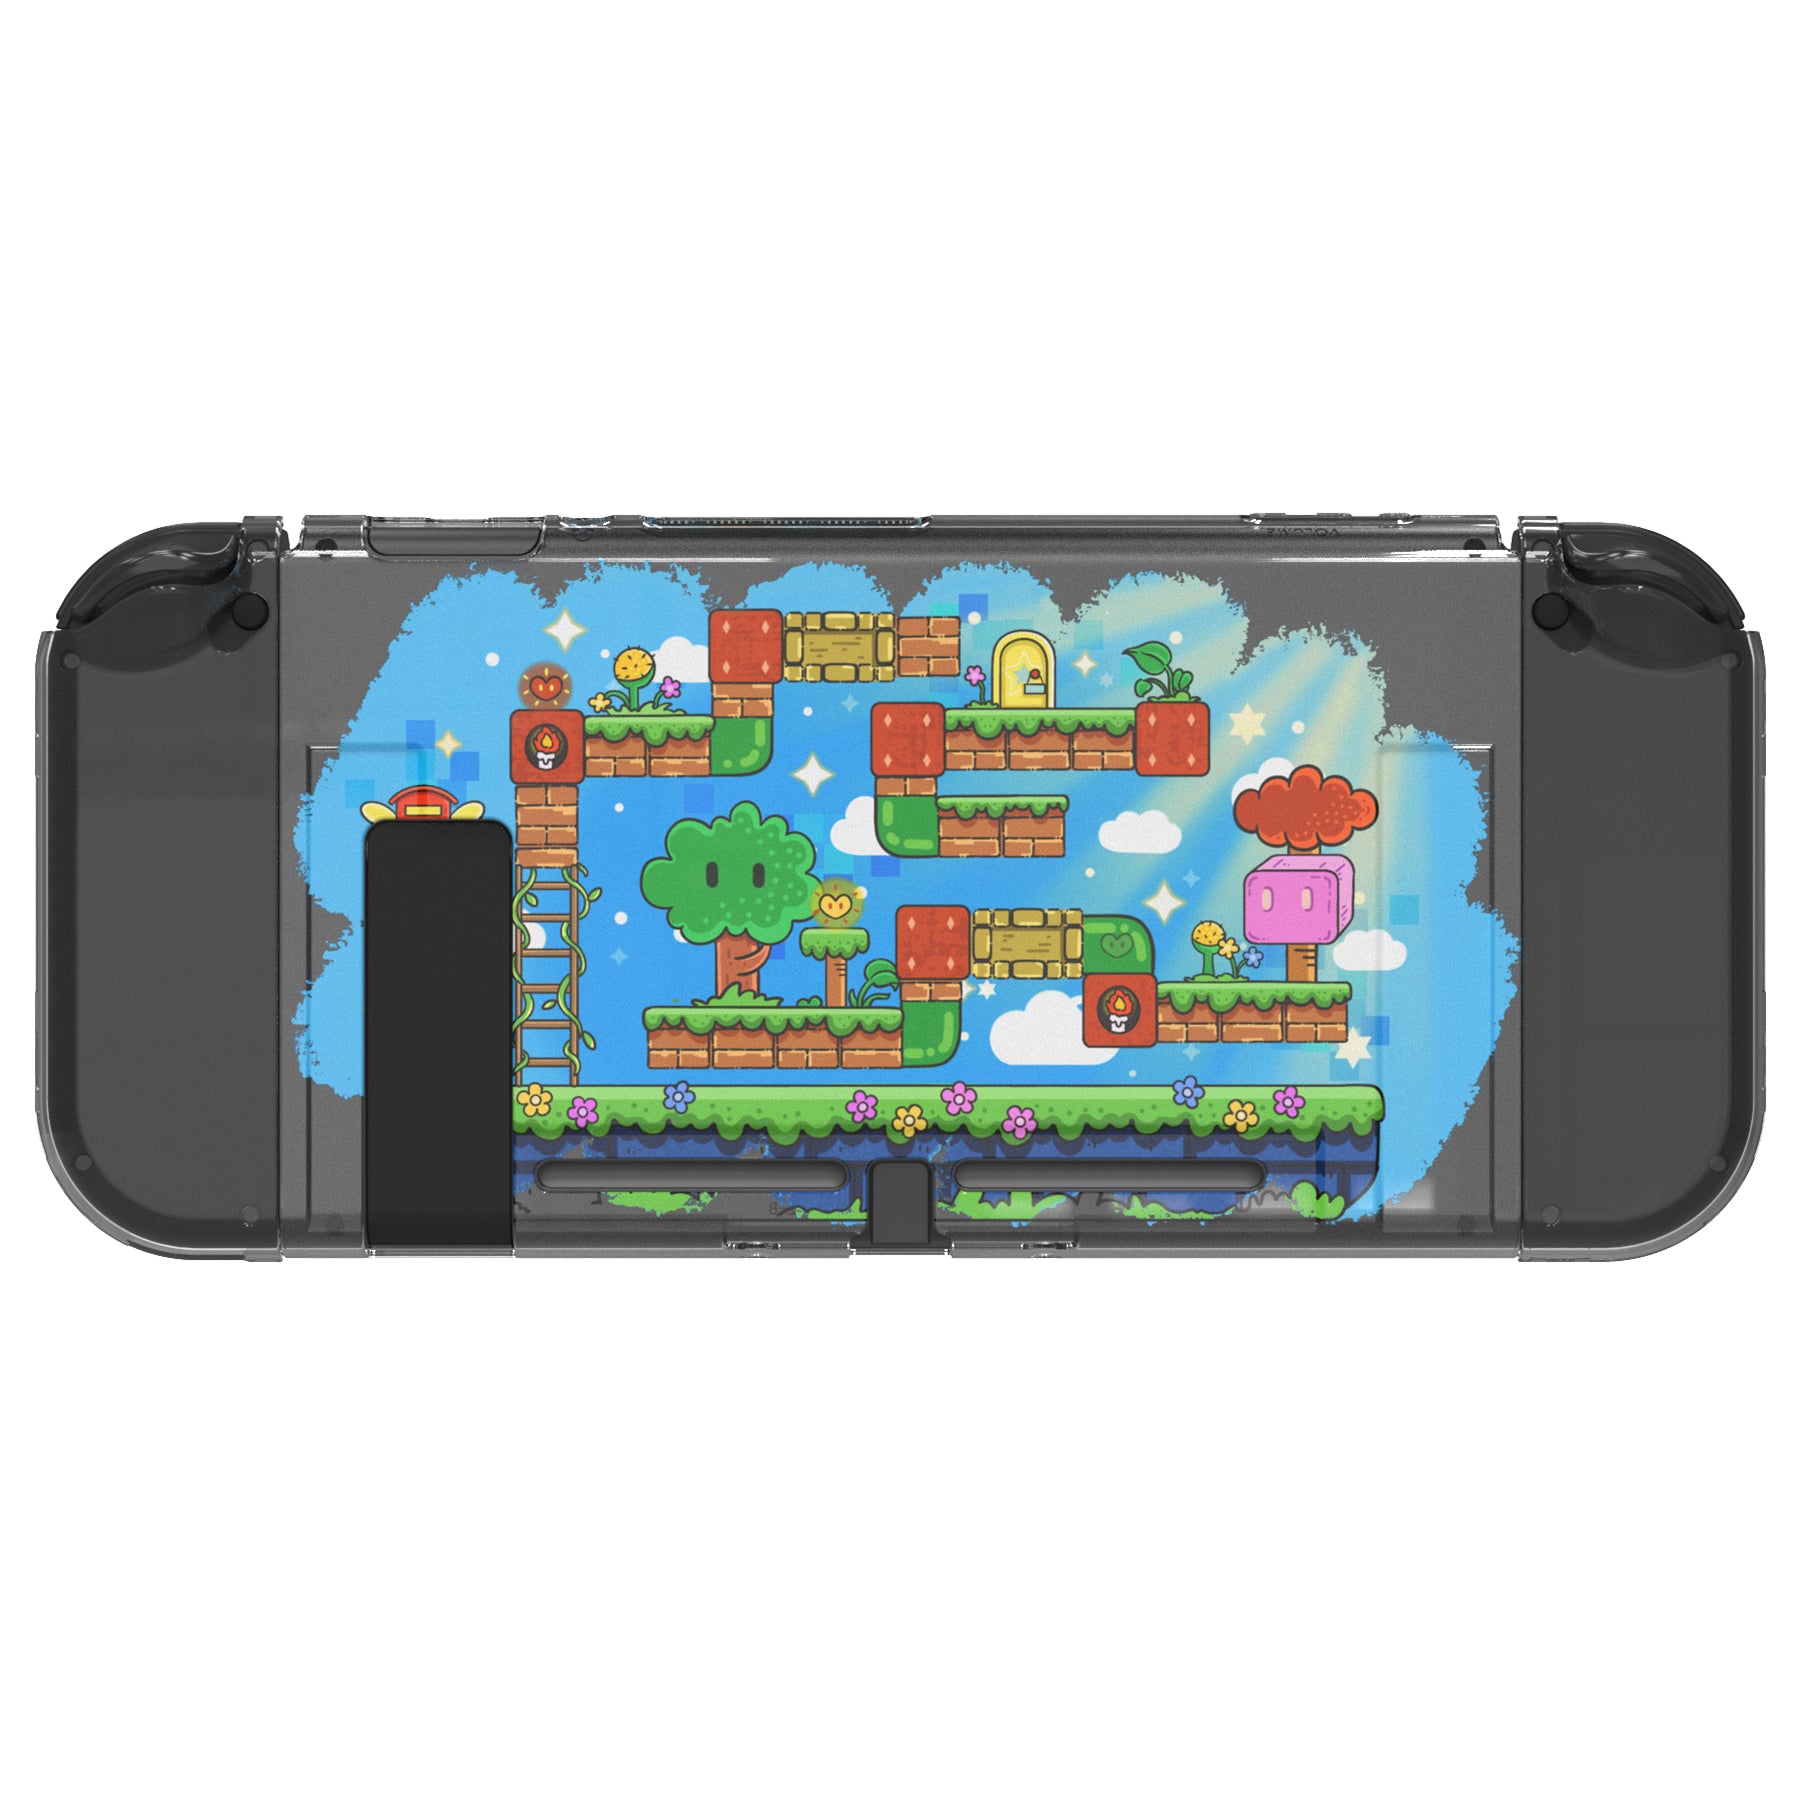 PlayVital Blocks Adventure Protective Case for NS, Soft TPU Slim Case Cover for NS Joycon Console with Colorful ABXY Direction Button Caps - NTU6041G2 PlayVital